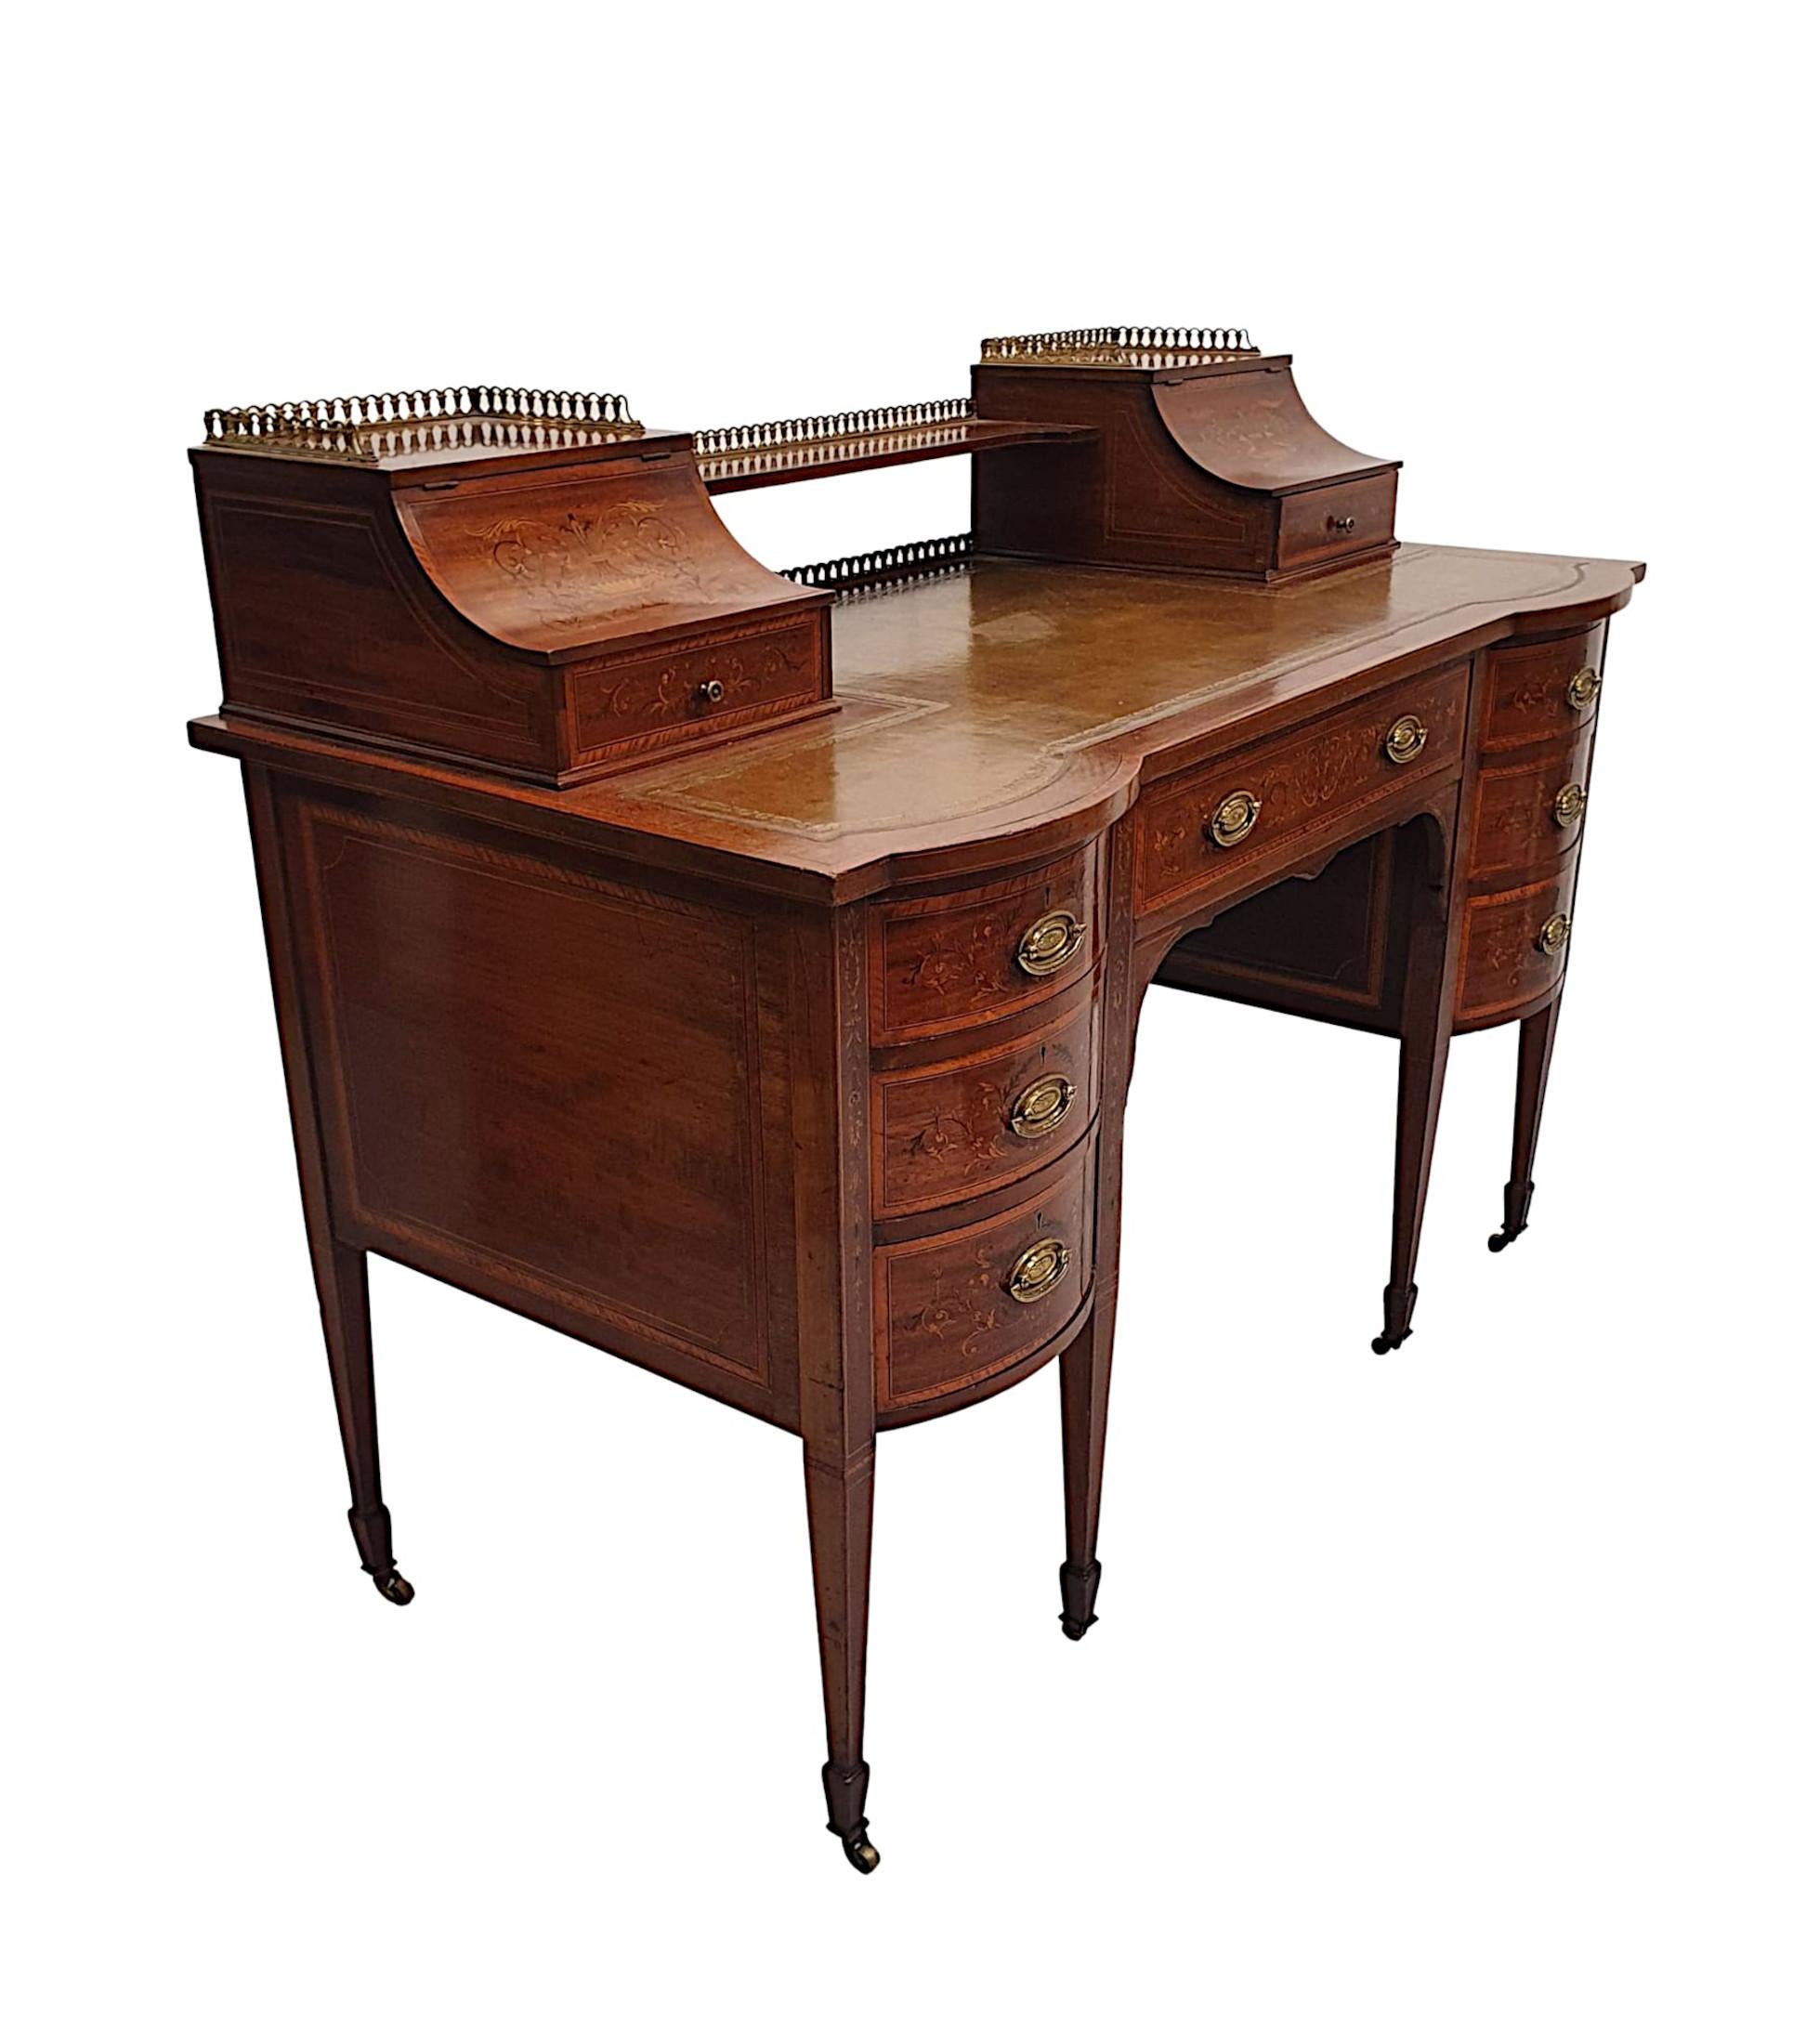 A Stunning Edwardian, richly patinated mahogany desk in the Carlton house style by Maple of London. Finely carved and of fabulous quality, line inlaid and cross banded with exquisite marquetry panel detail throughout depicting exquisite Neoclassical